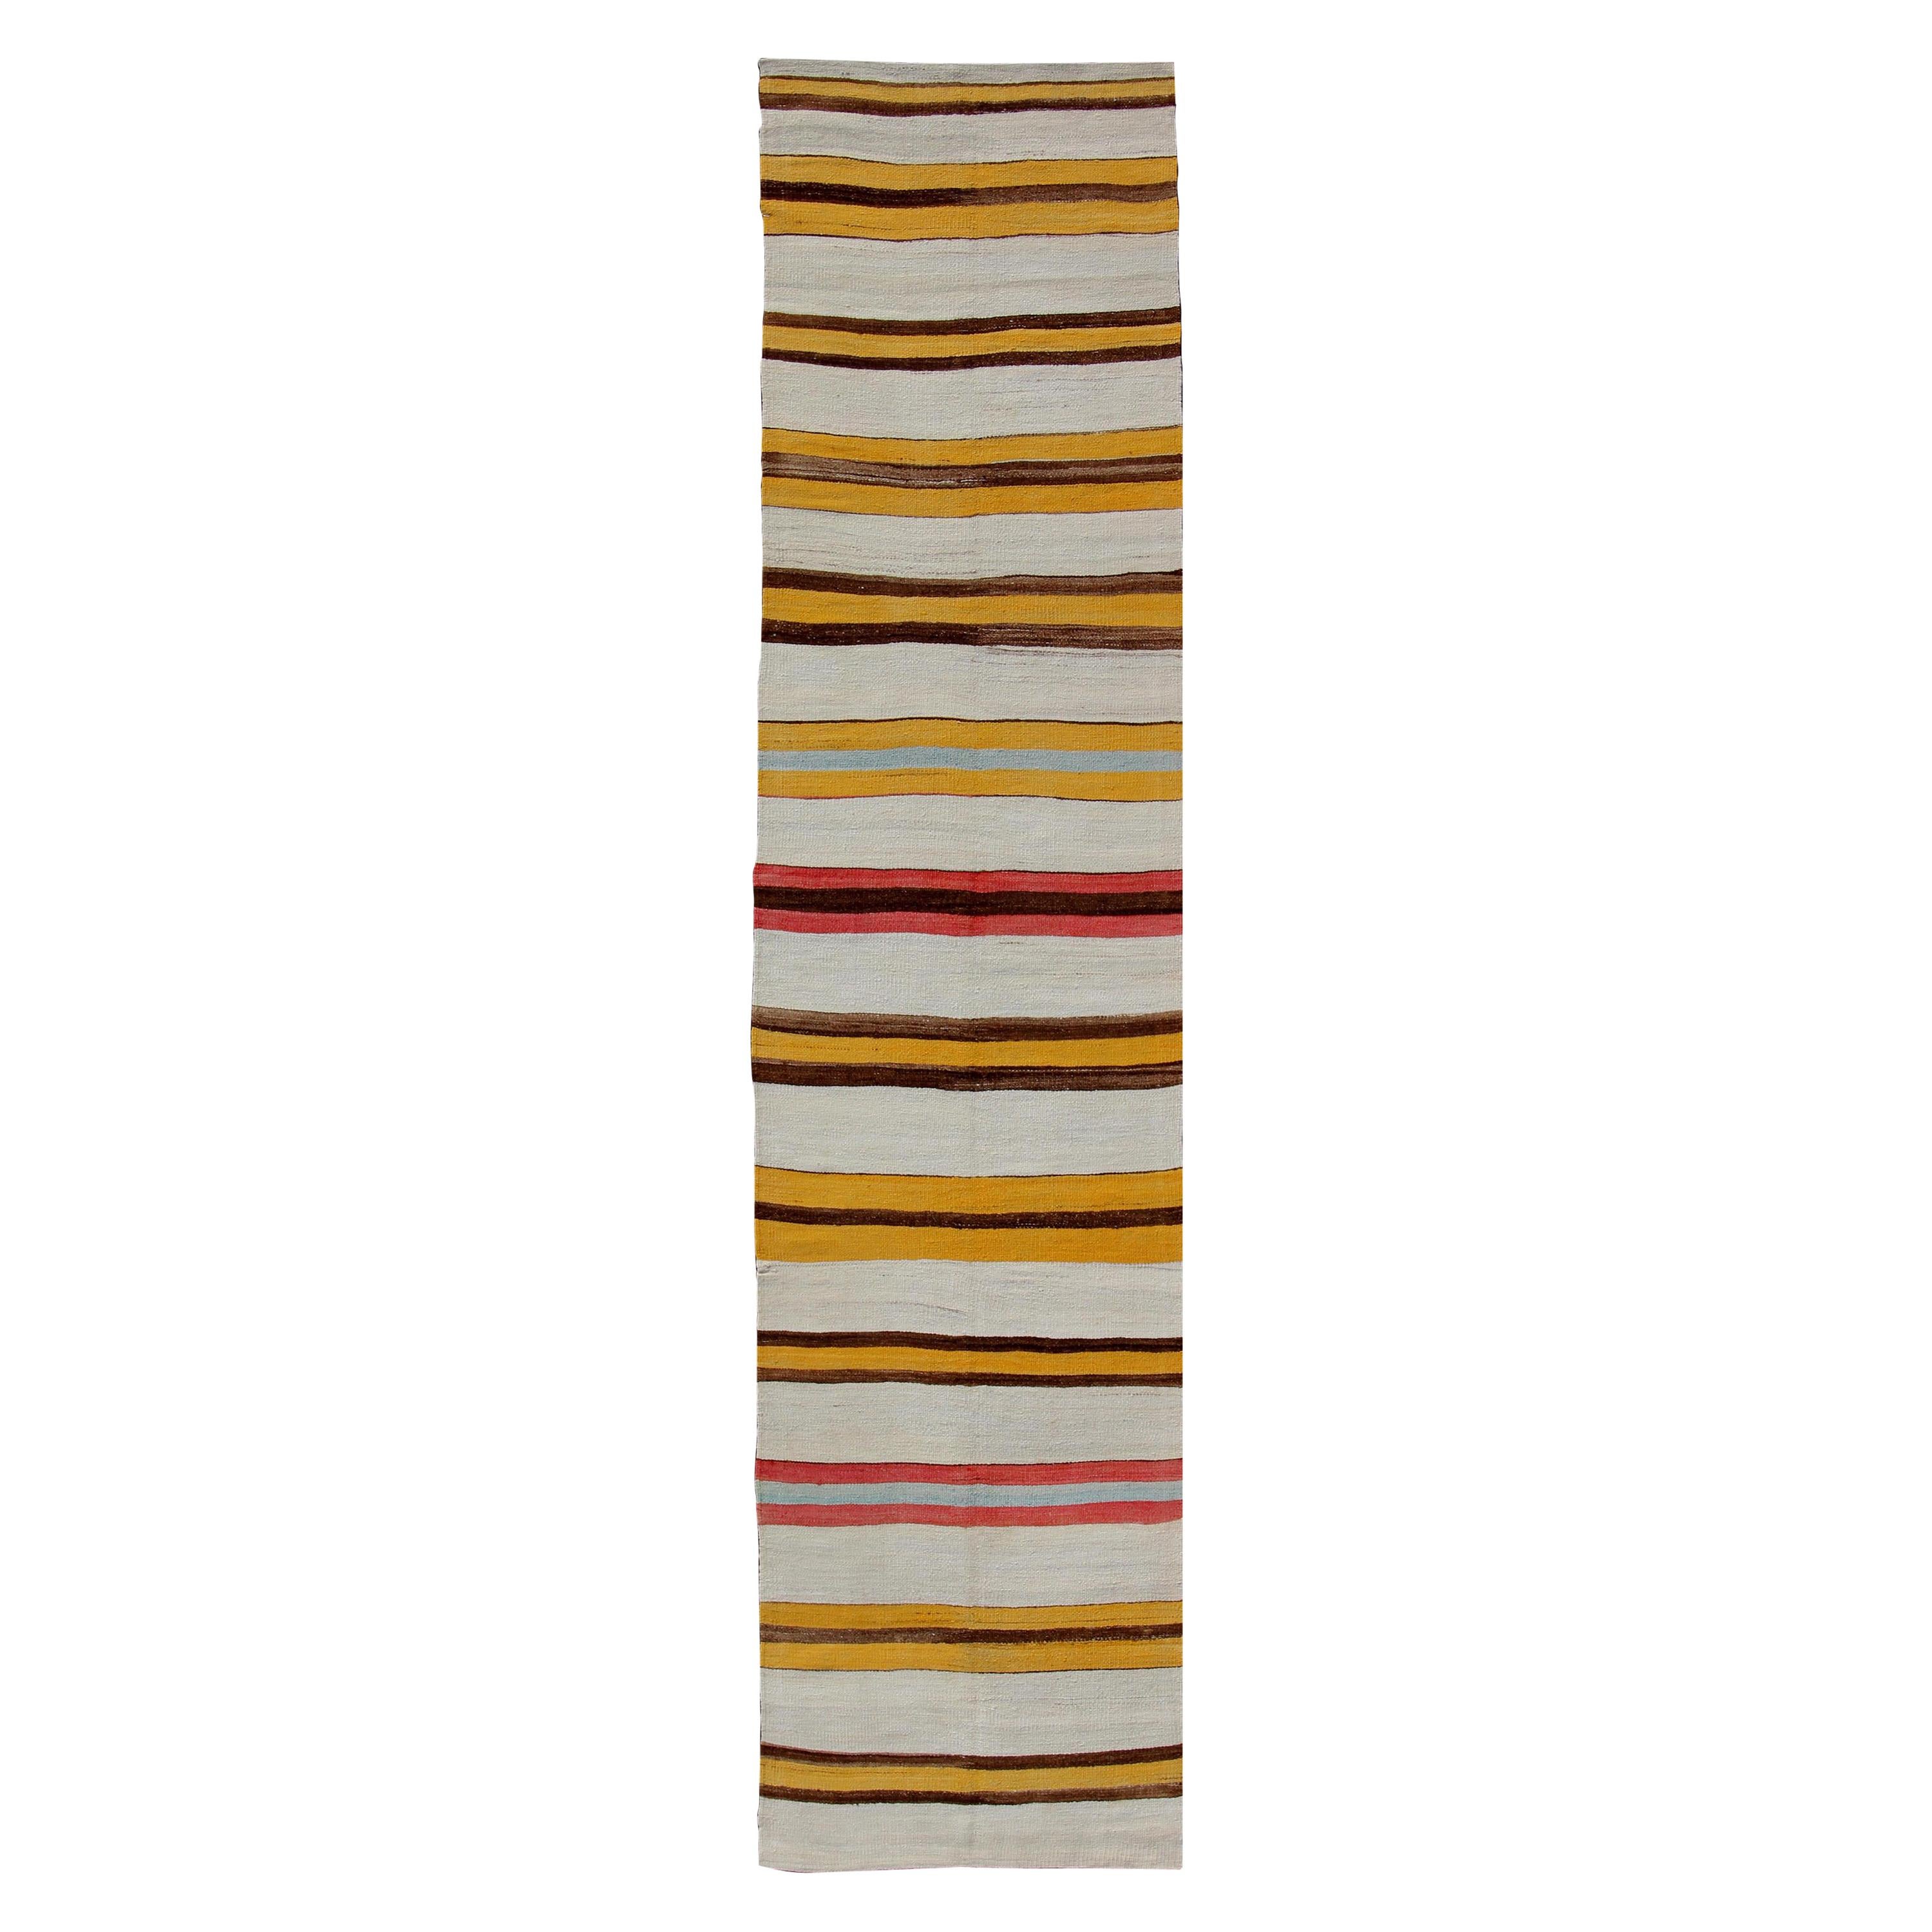  Vintage Colorful Kilim Runner With Stripe Design in Yellow, Ivory, Red & Brown 